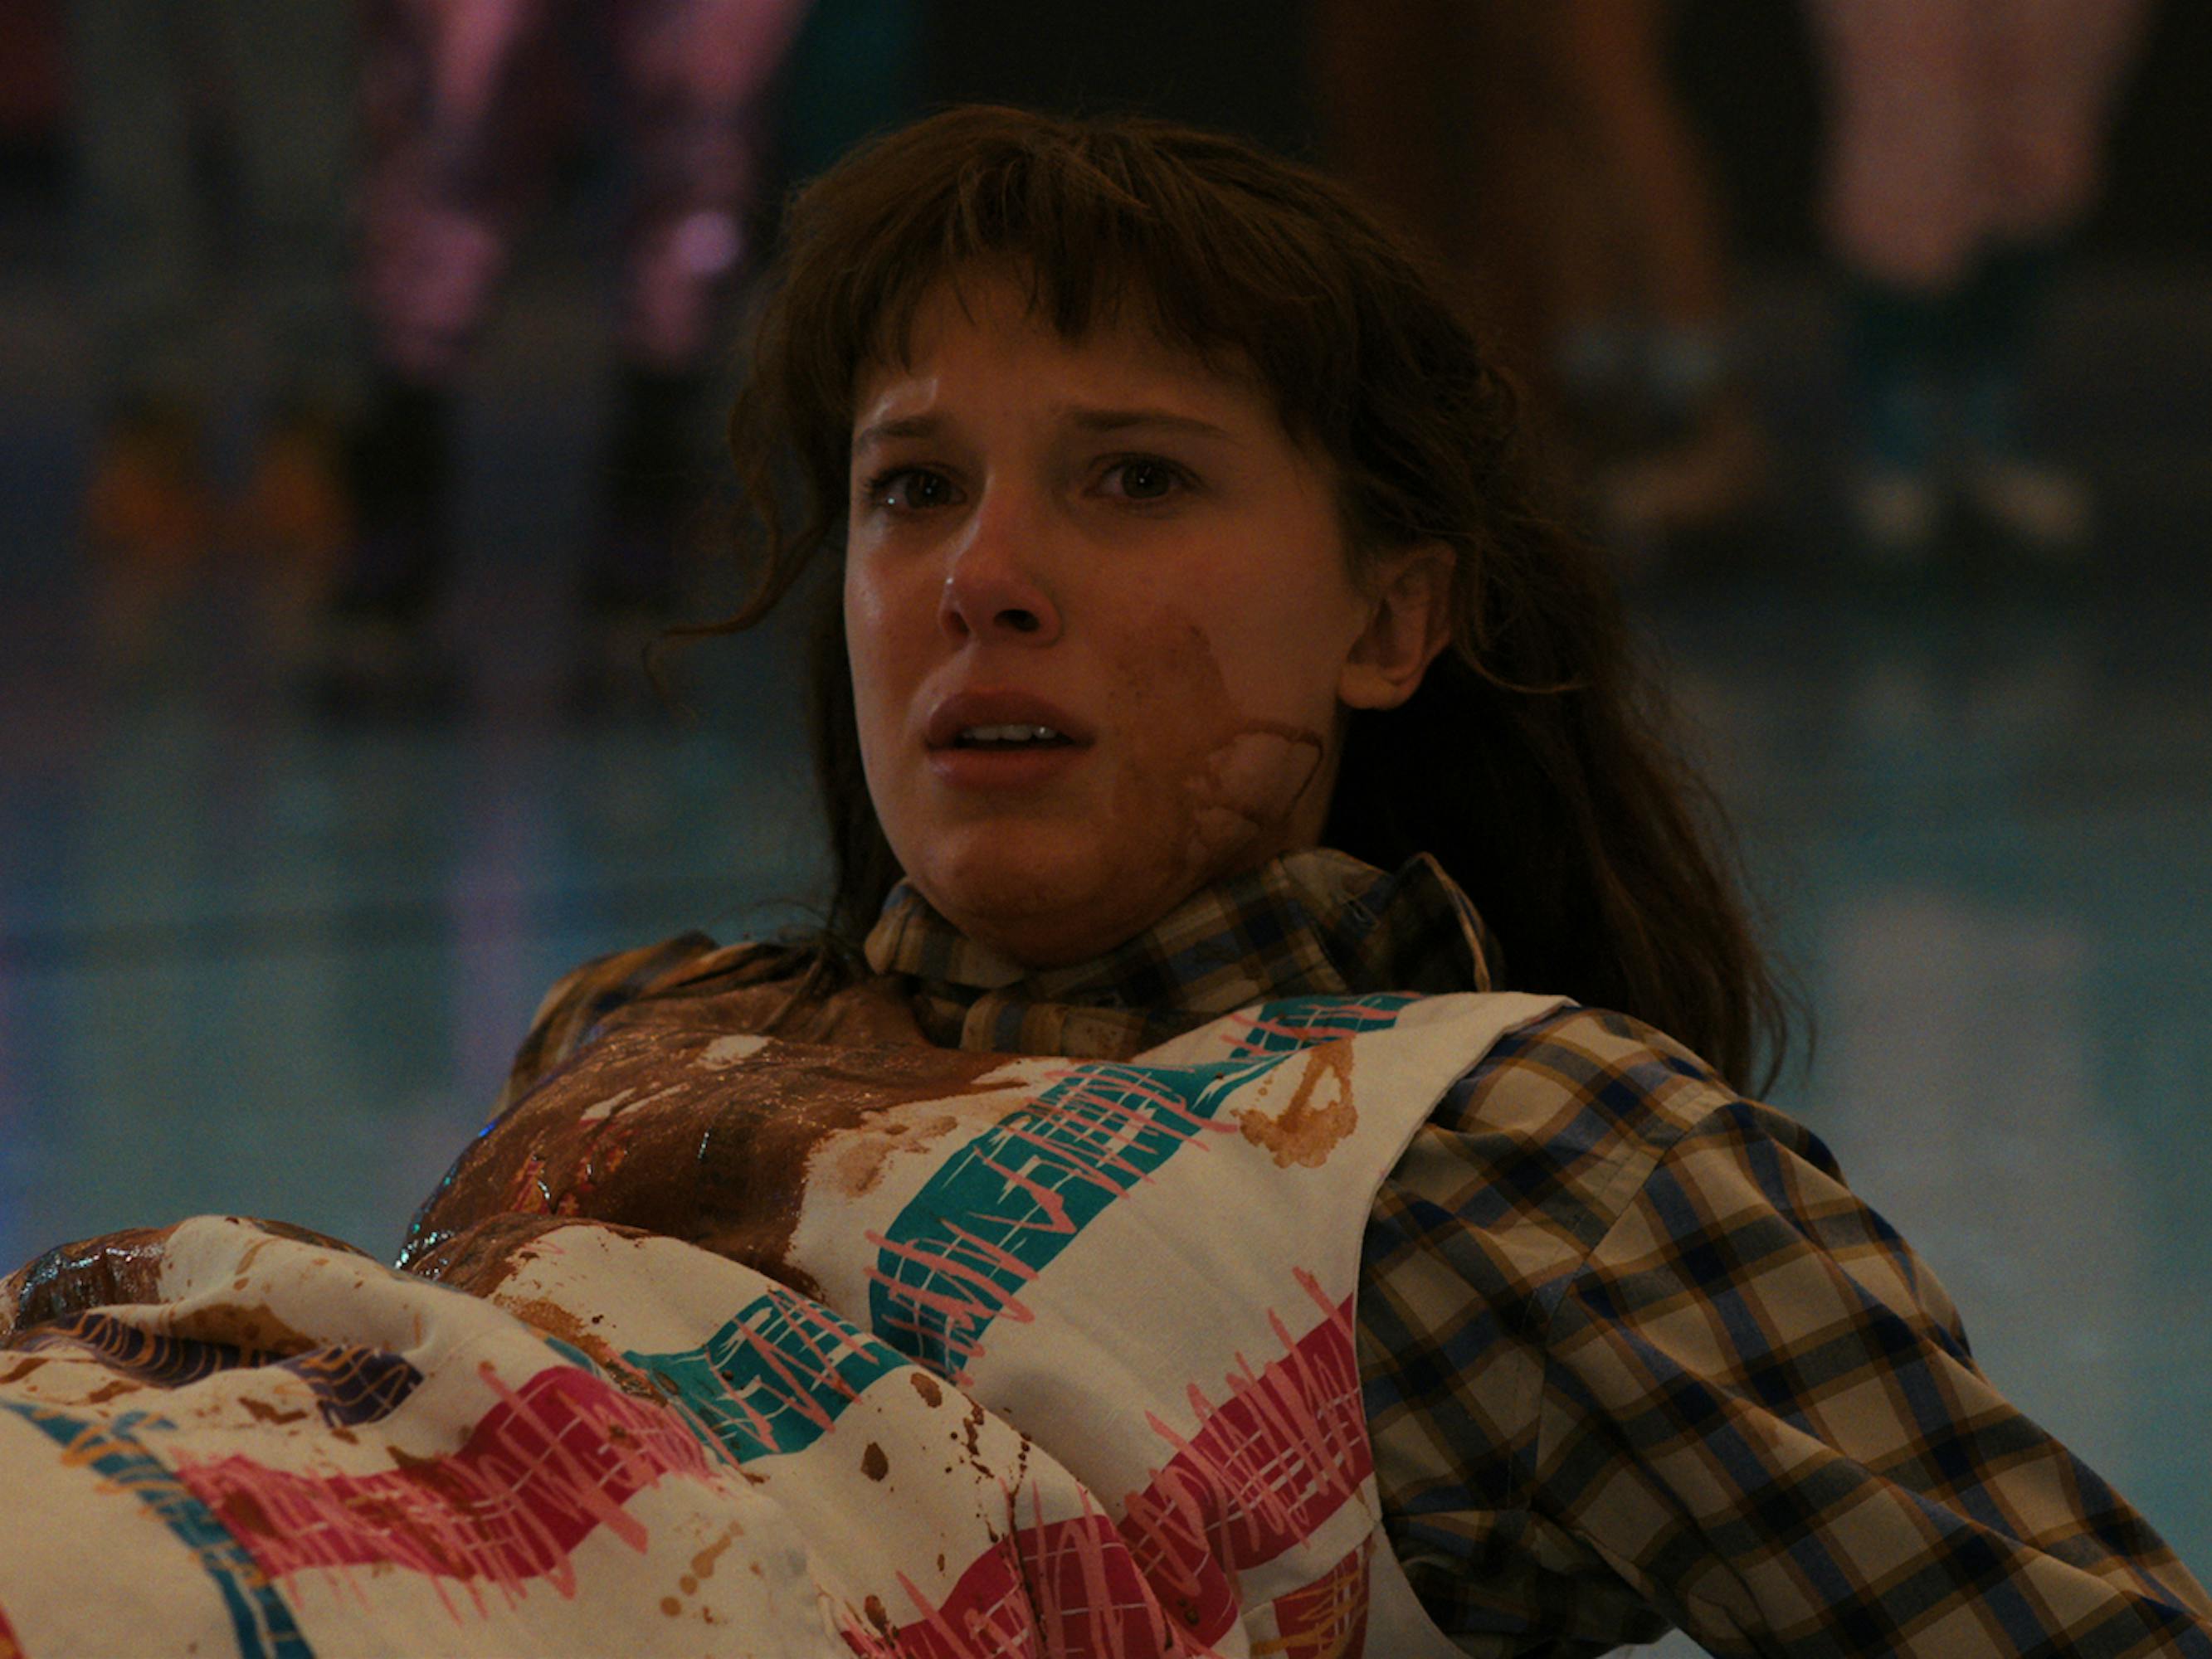 Eleven (Millie Bobby Brown) wears a checkered shirt under a food splattered dress and lies on the ground.